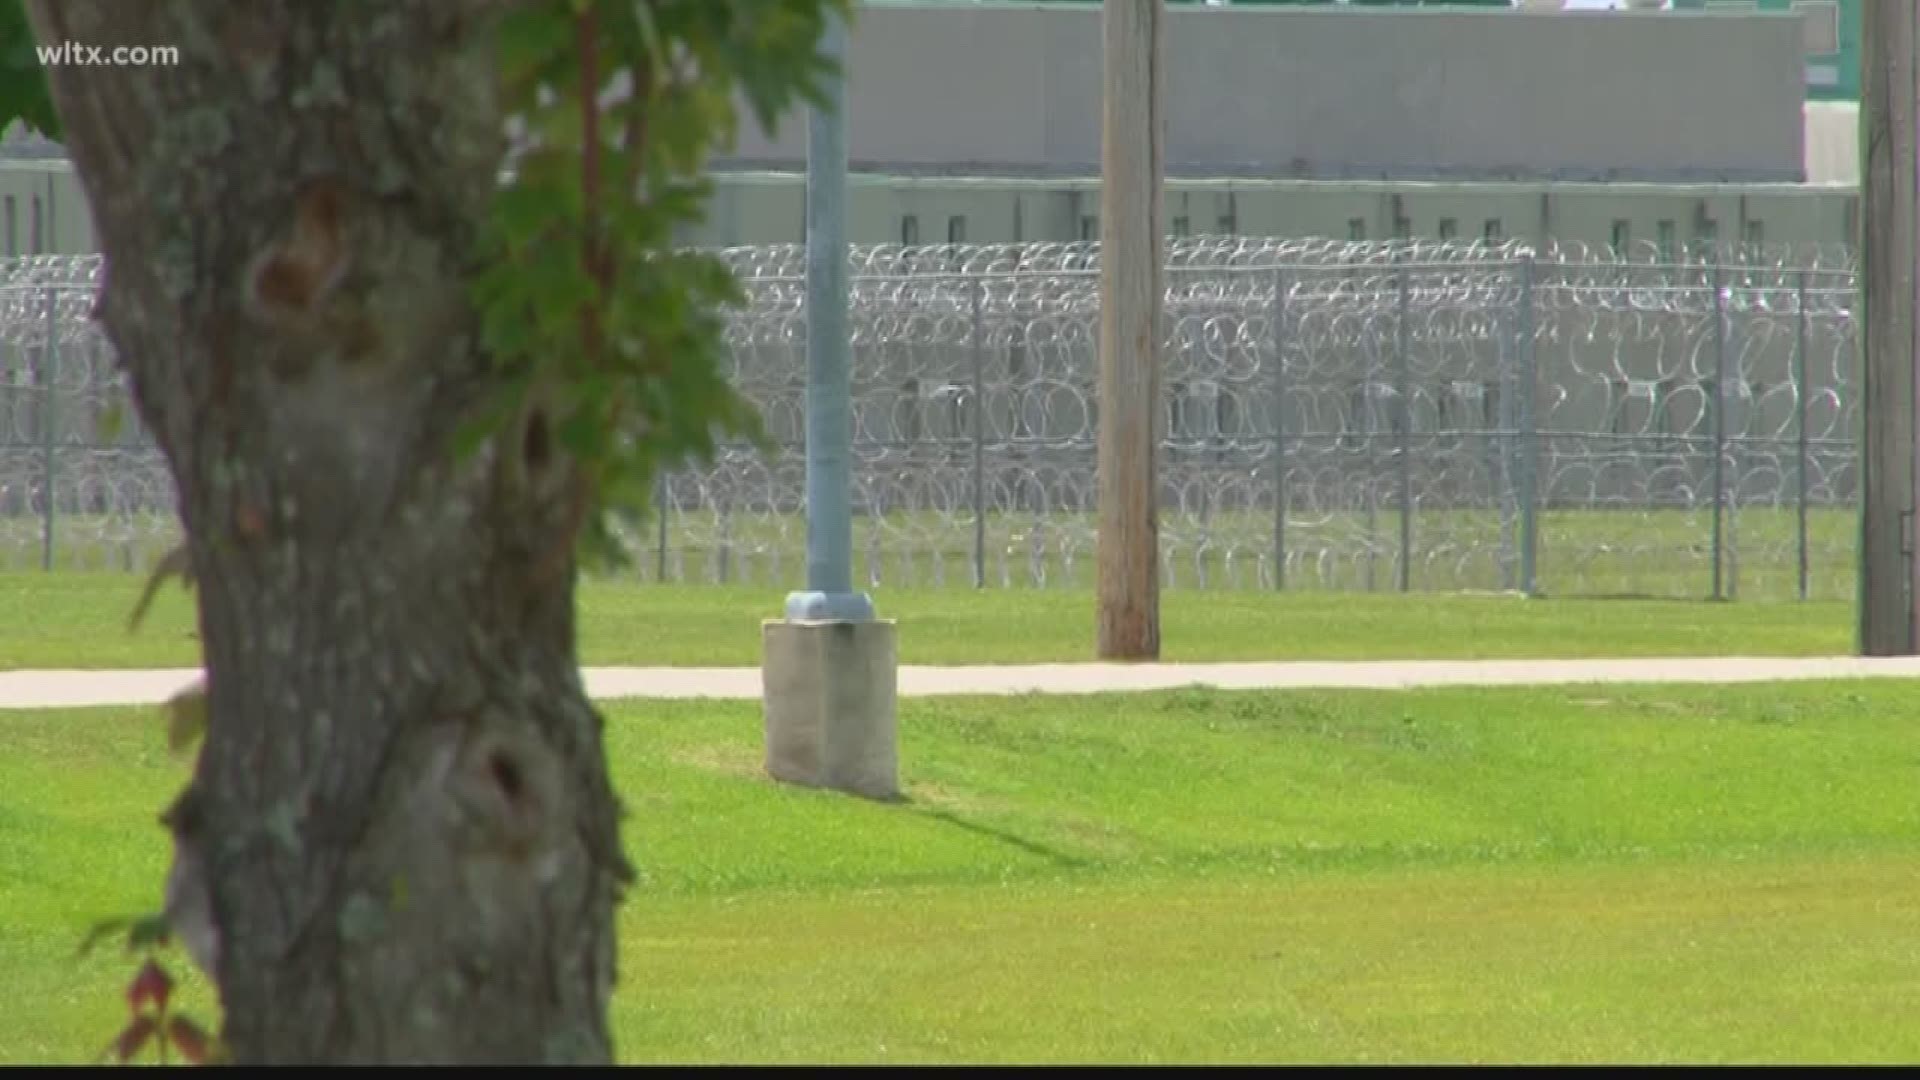 Prison officials confirm to News19 that there was an incident at Lee Correctional on Sunday night, but provided no additional details.